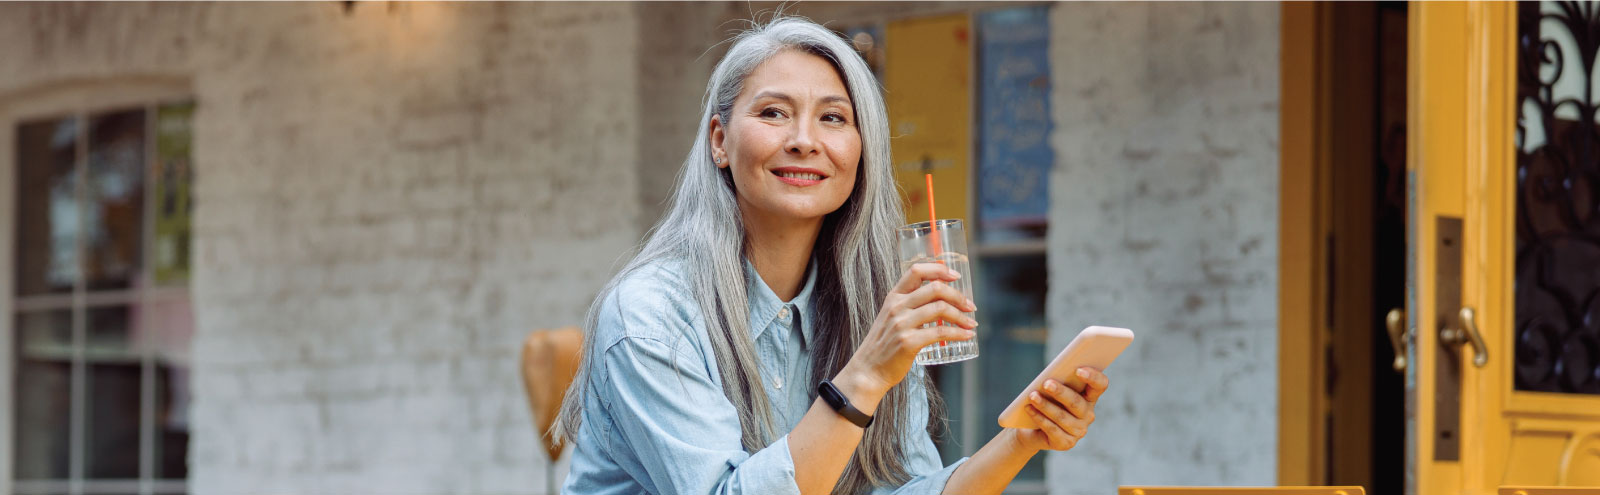 Grey-haired woman at an outdoor cafe holding a water and her phone.